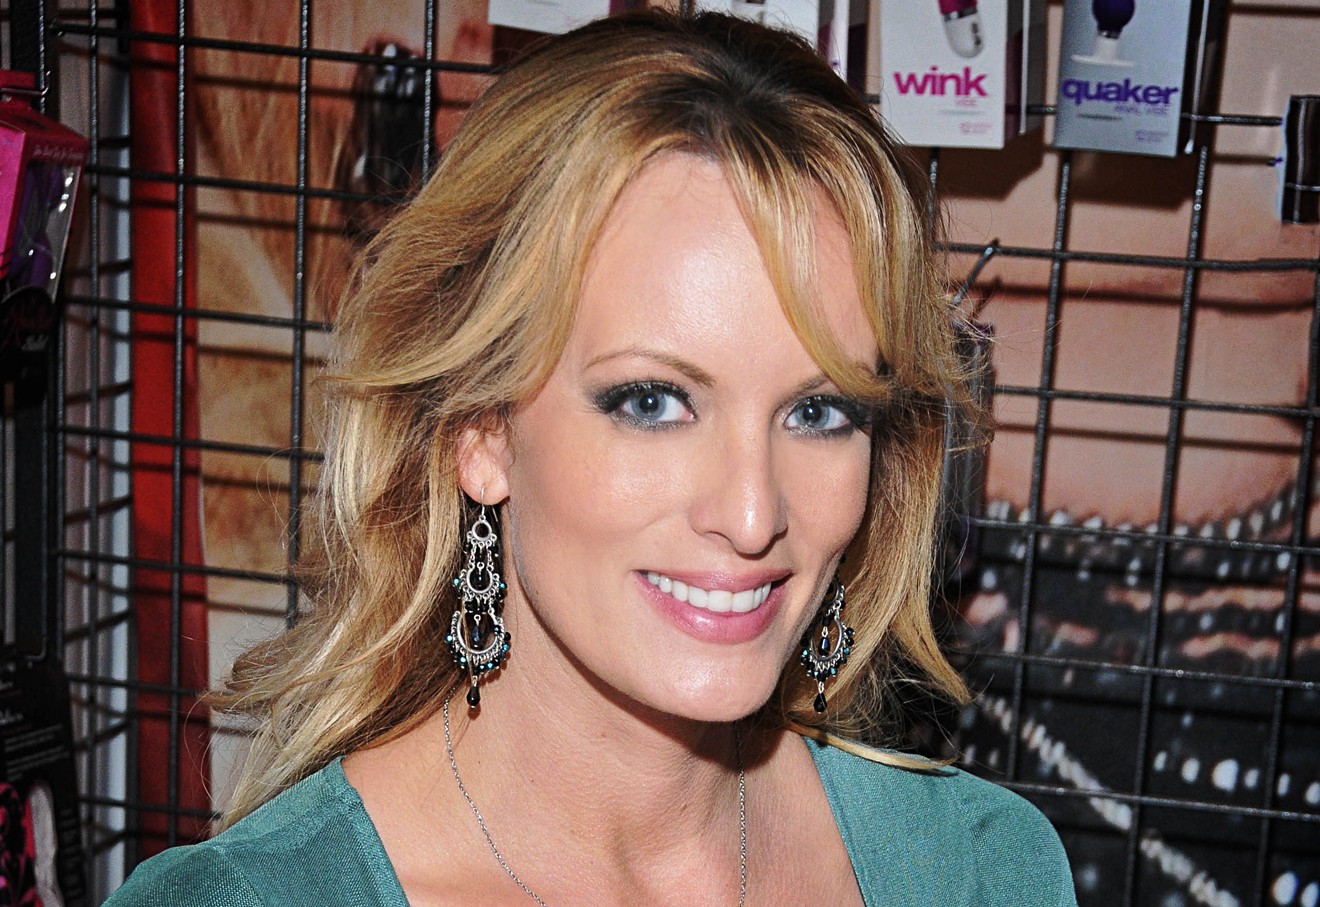 Stormy Daniels will return to South Florida this month.